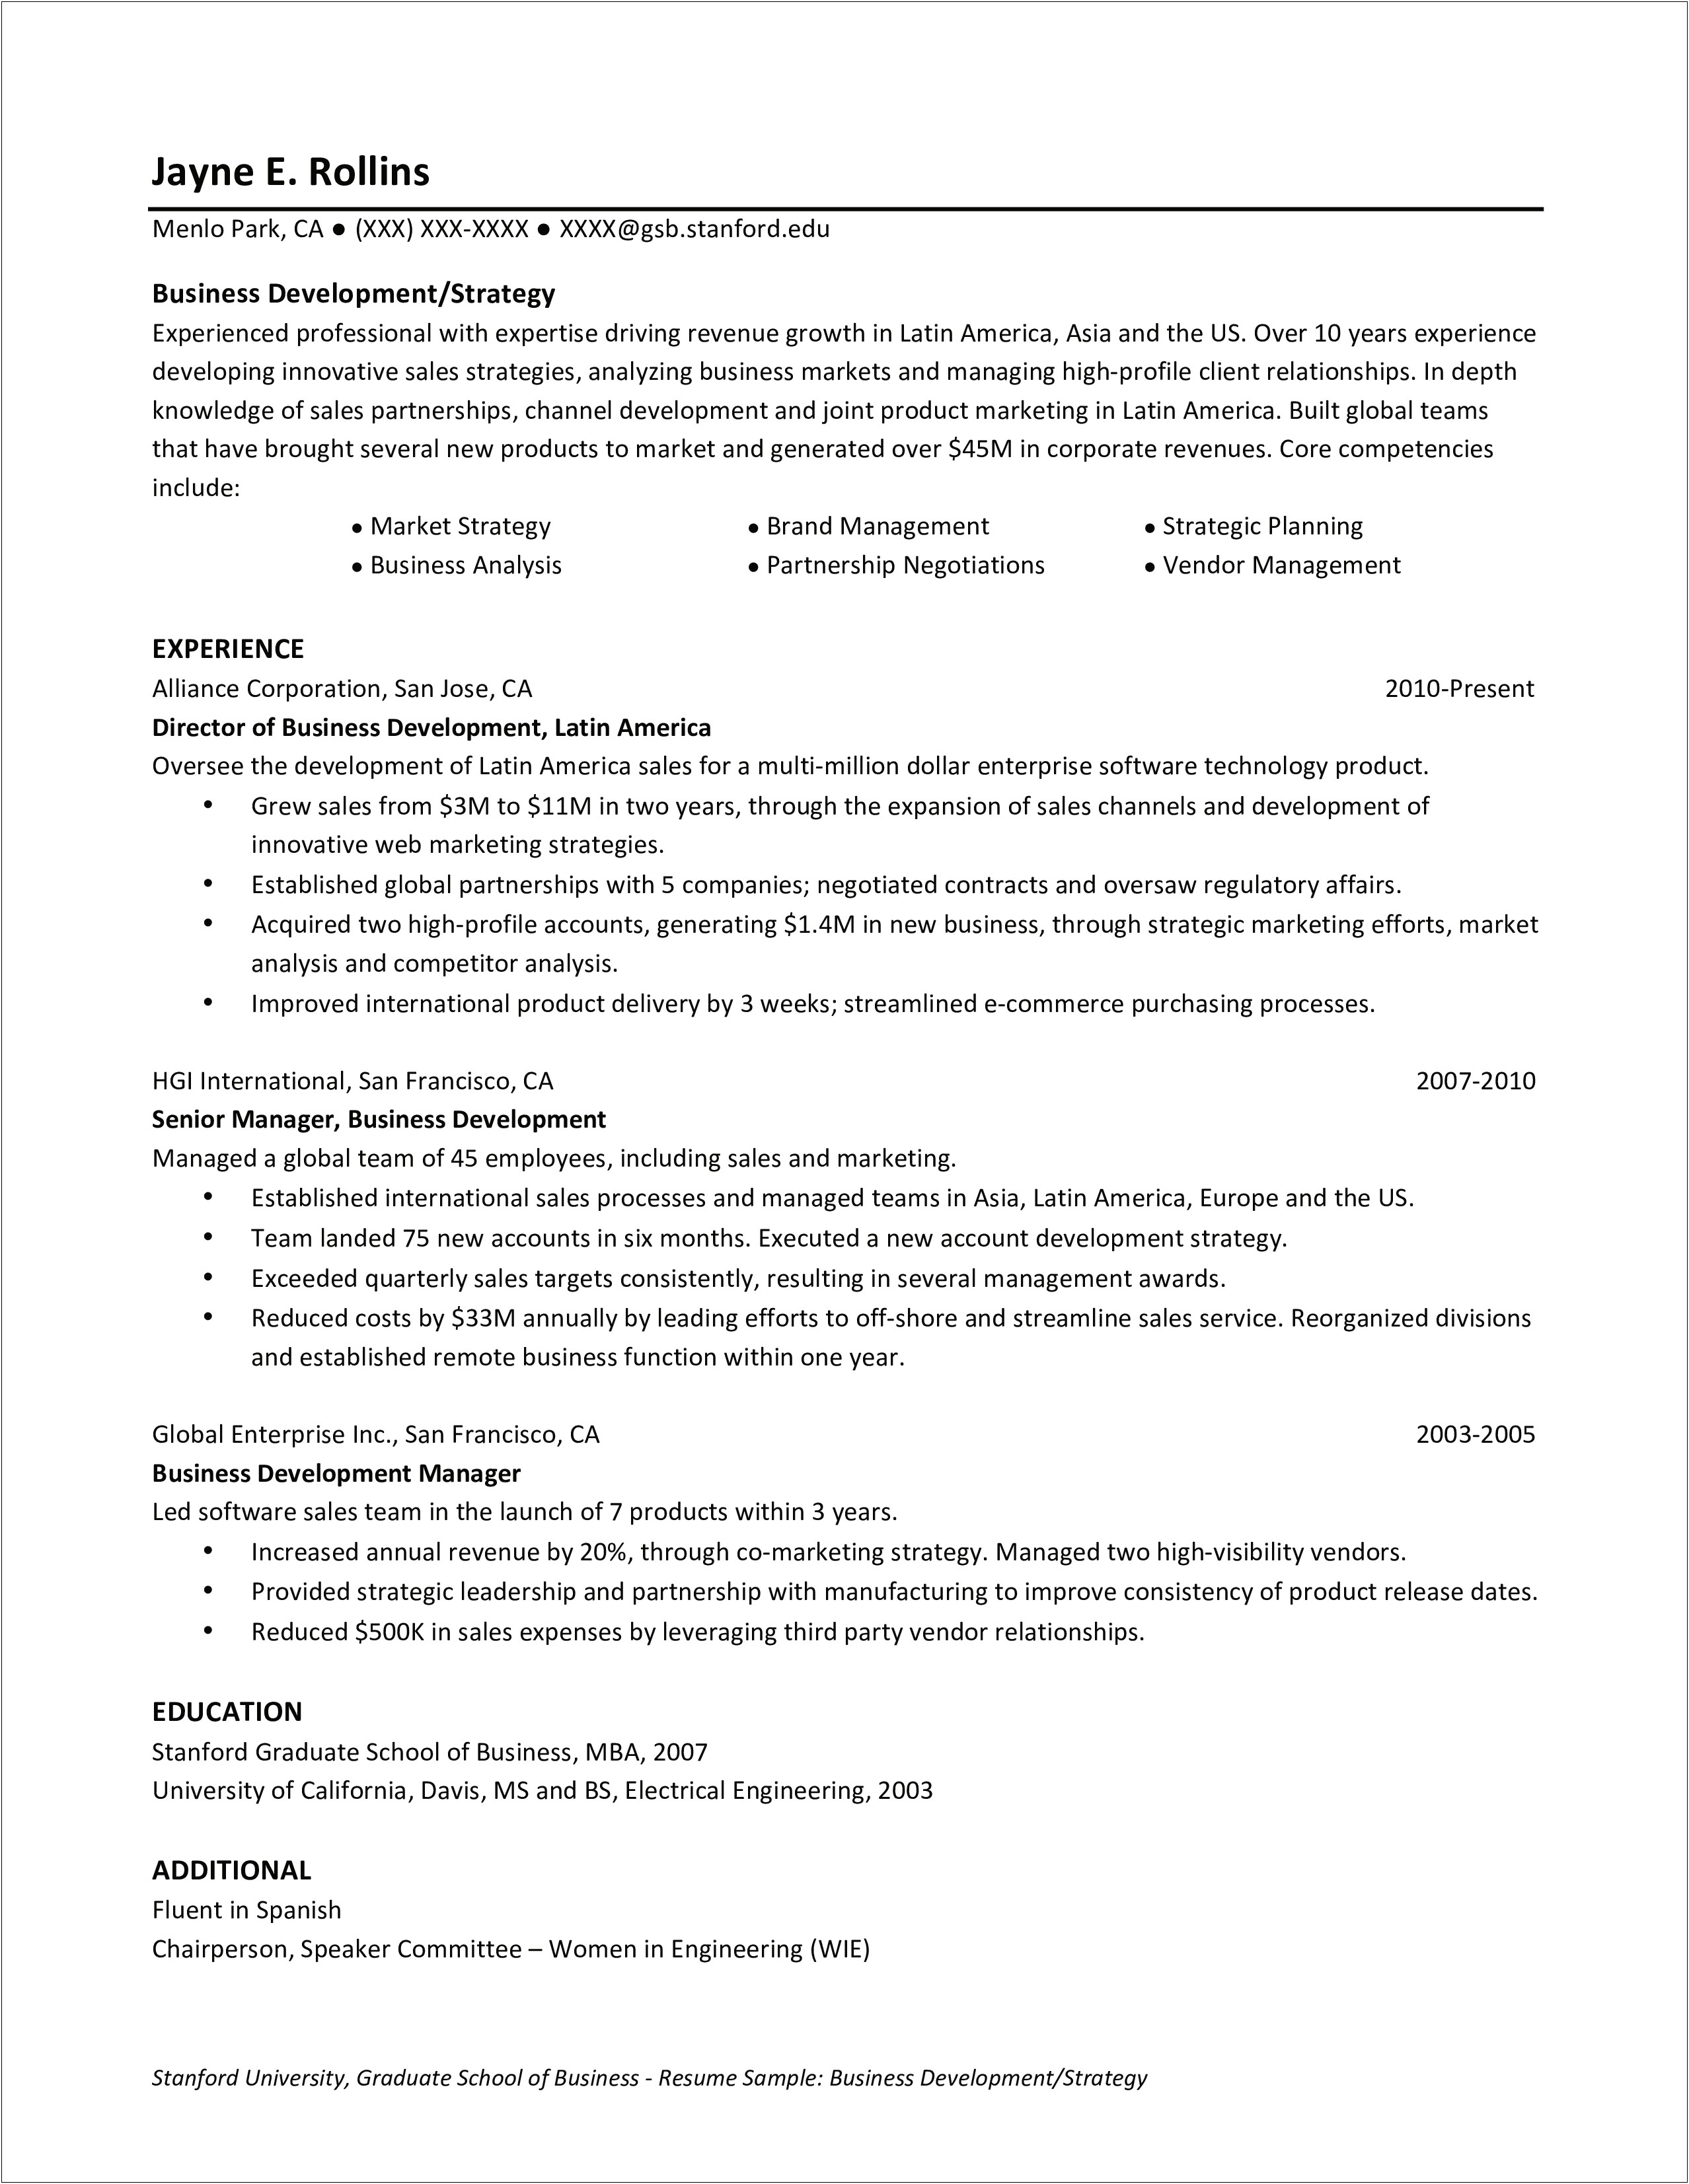 Resume Format For Business Development Manager